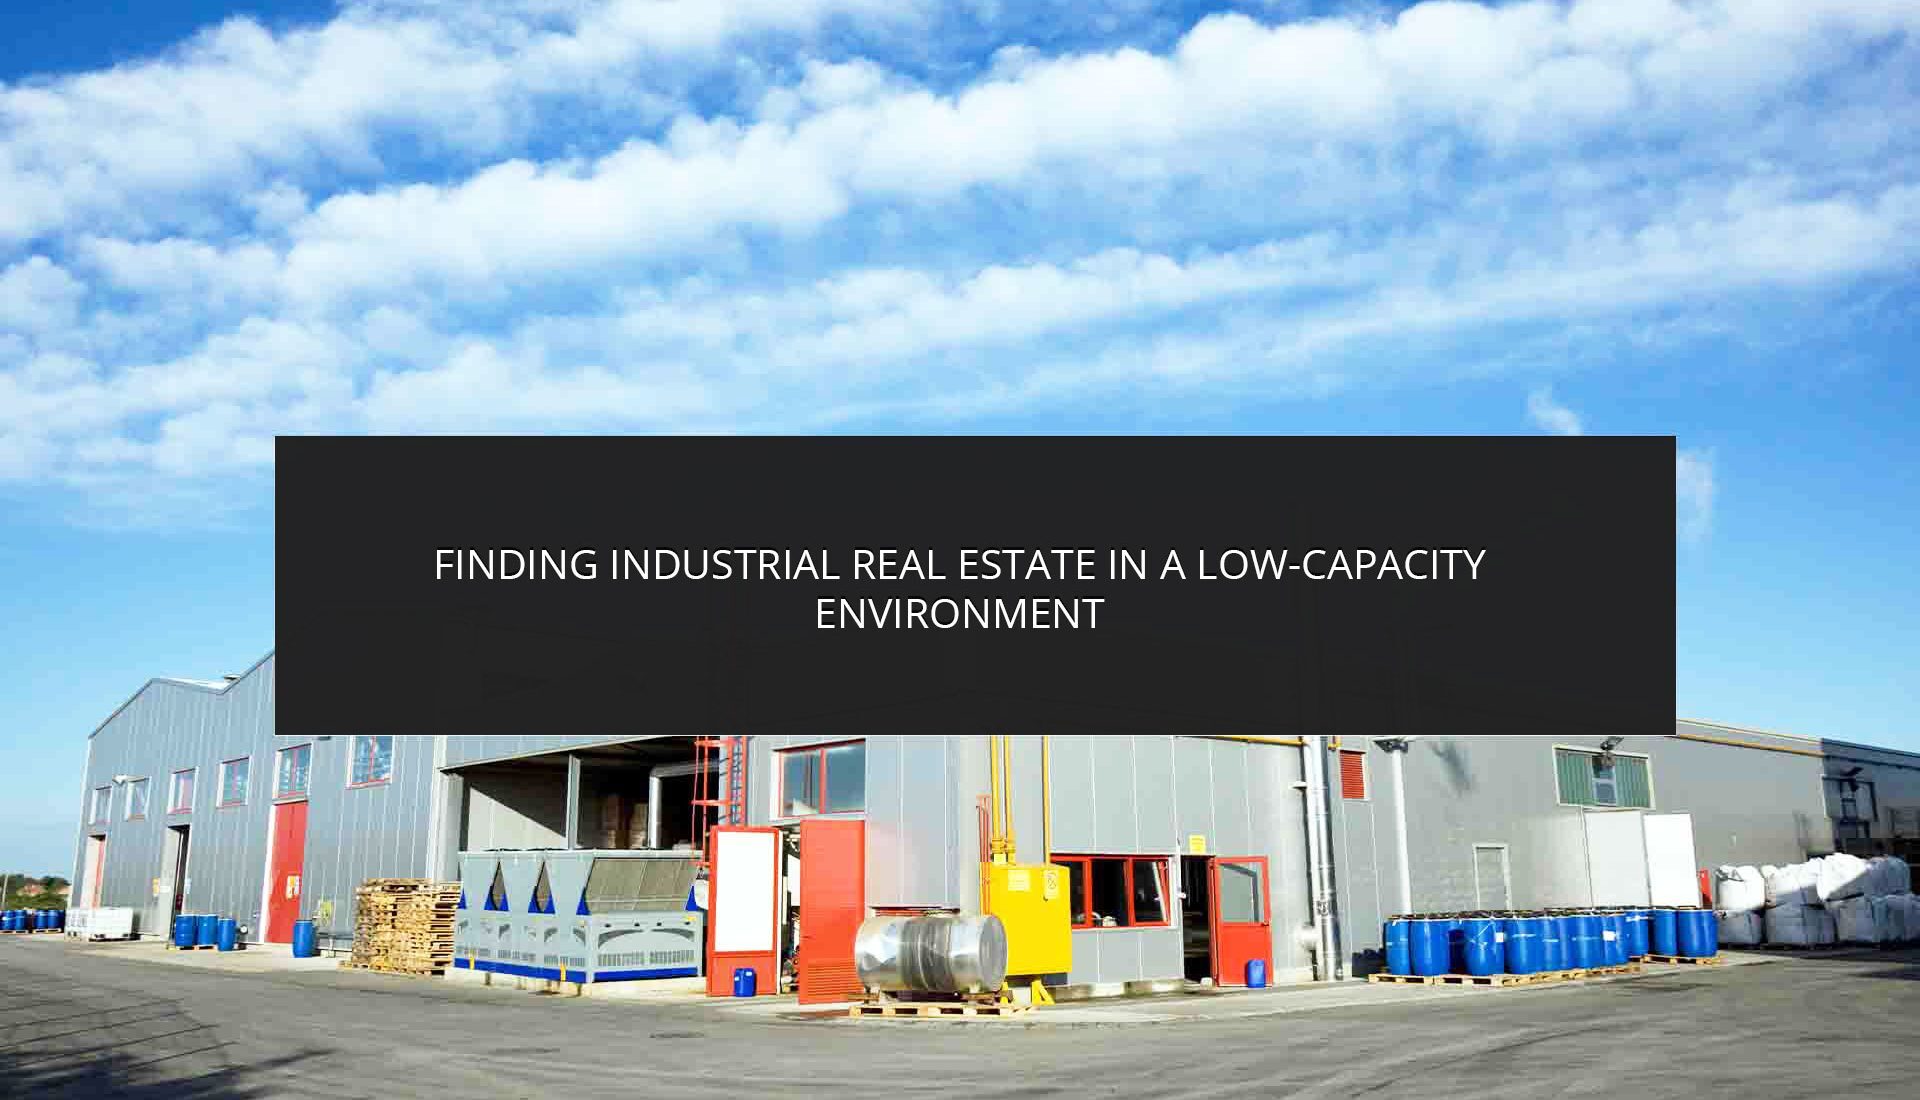 Finding Industrial Real Estate in a Low-Capacity Environment